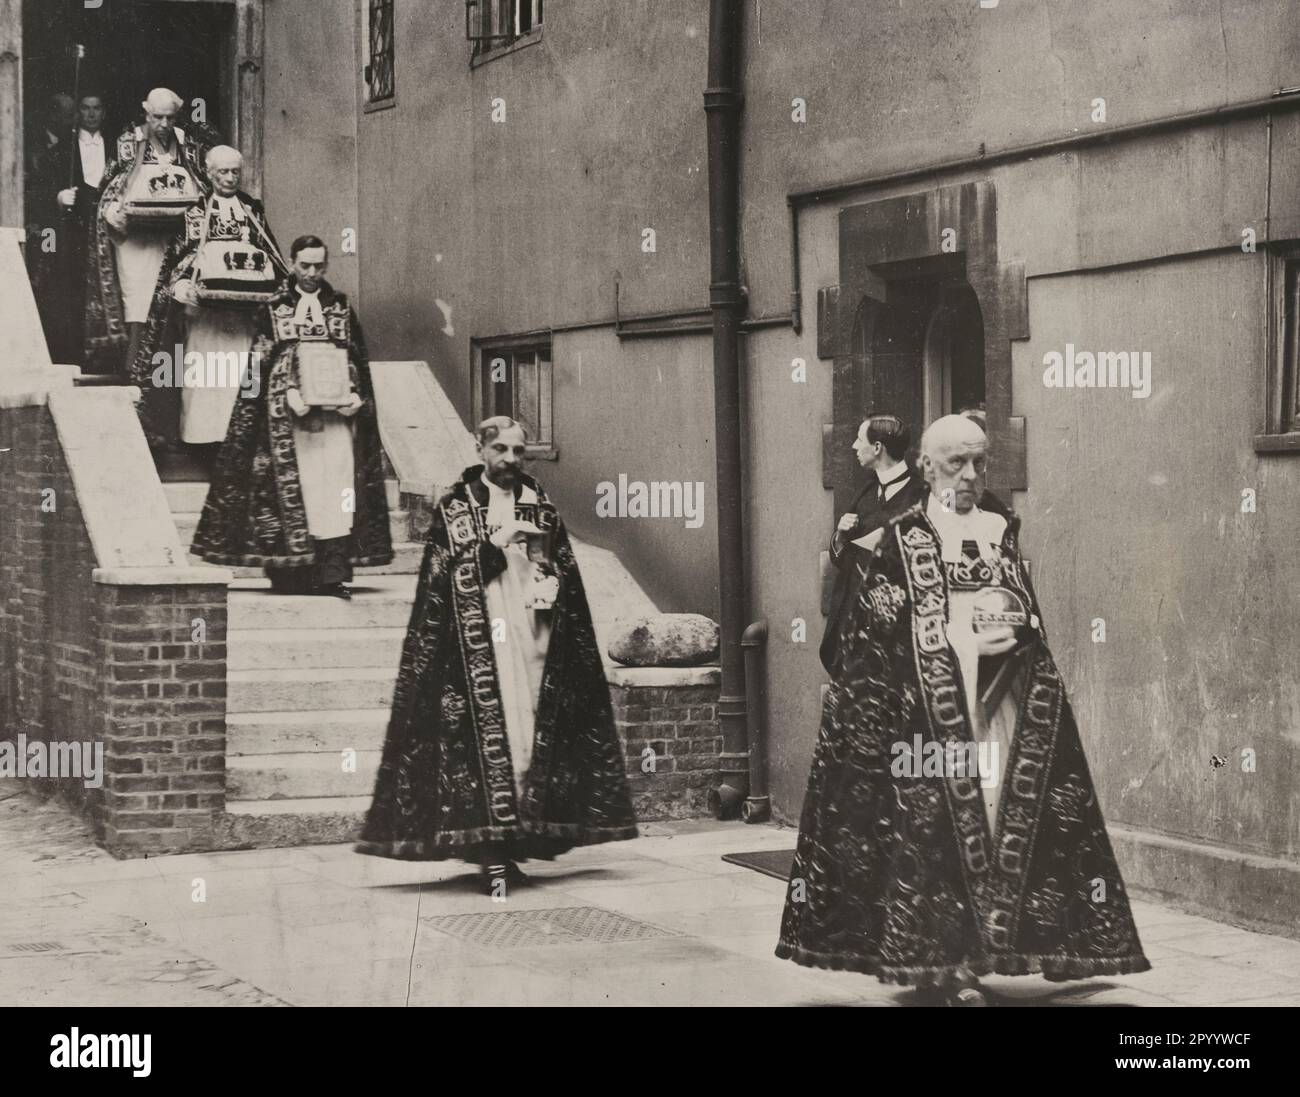 King George V coronation. Carrying the coronation regalia from Jerusalem Chamber to Westminster Abbey - Photograph shows a procession of men, wearing elaborate robes, leaving the Jerusalum Chamber and each carrying a different item for the king's coronation, 1911 Stock Photo